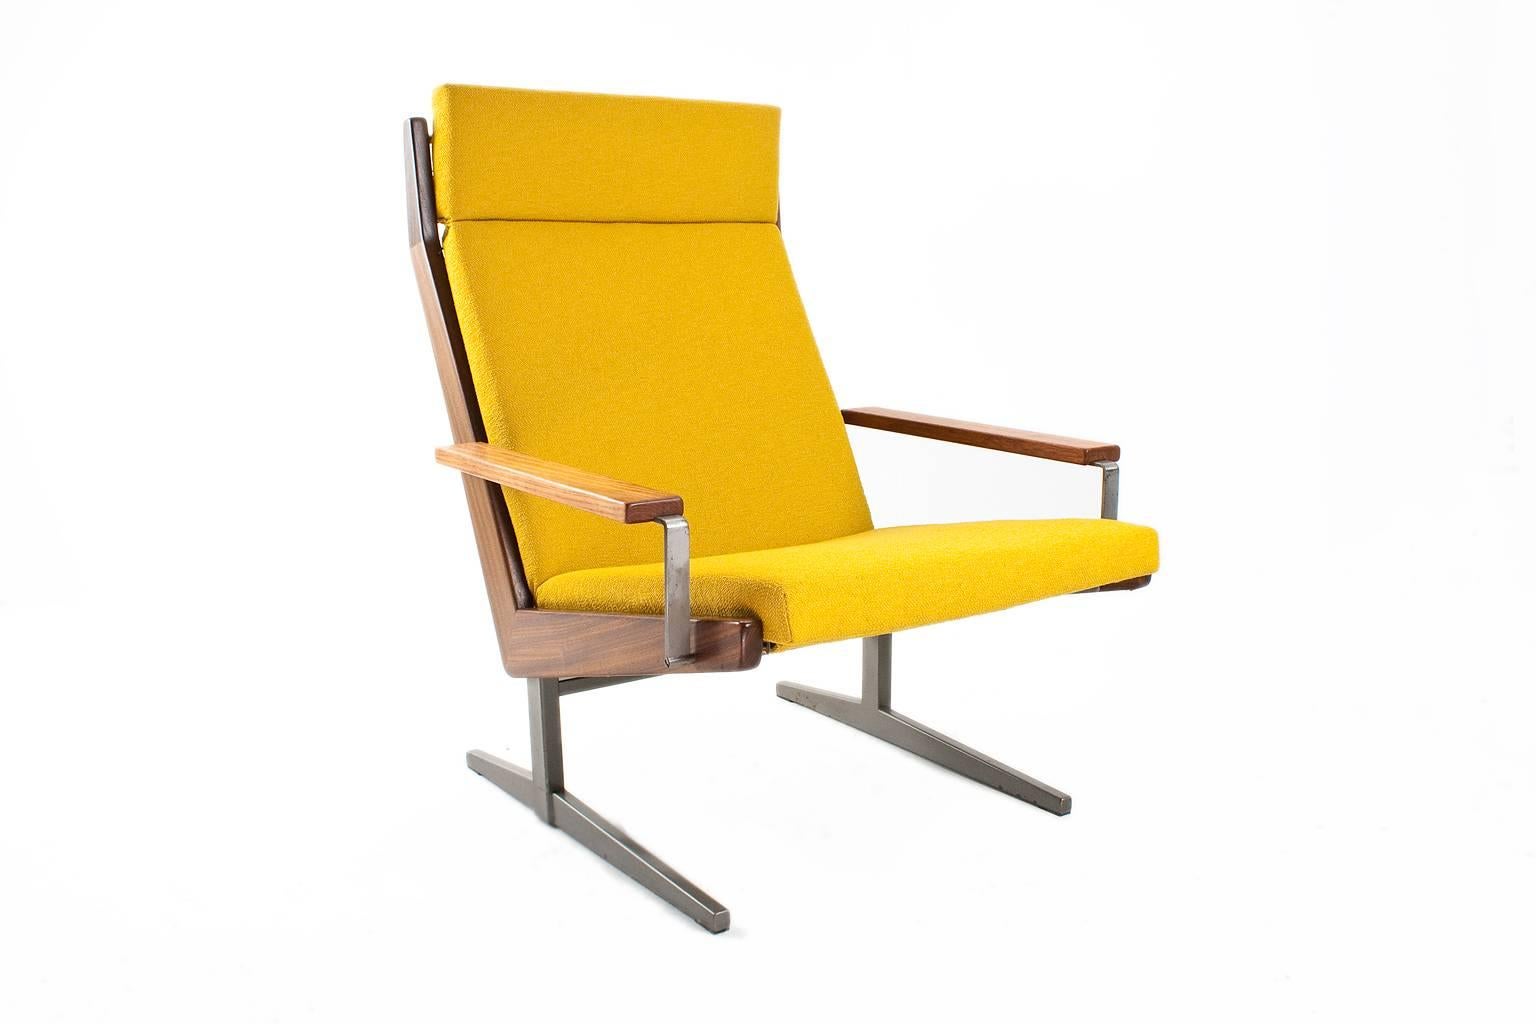 Original Robbert (Rob) Parry lotus lounge chair for Dutch furniture company Gelderland (collection 1950s-1960s) in teakwood and grey metal with new yellow upholstery (De Ploeg-Korinthe) on a grey metal pyramide foot.

The fabric, fillings and